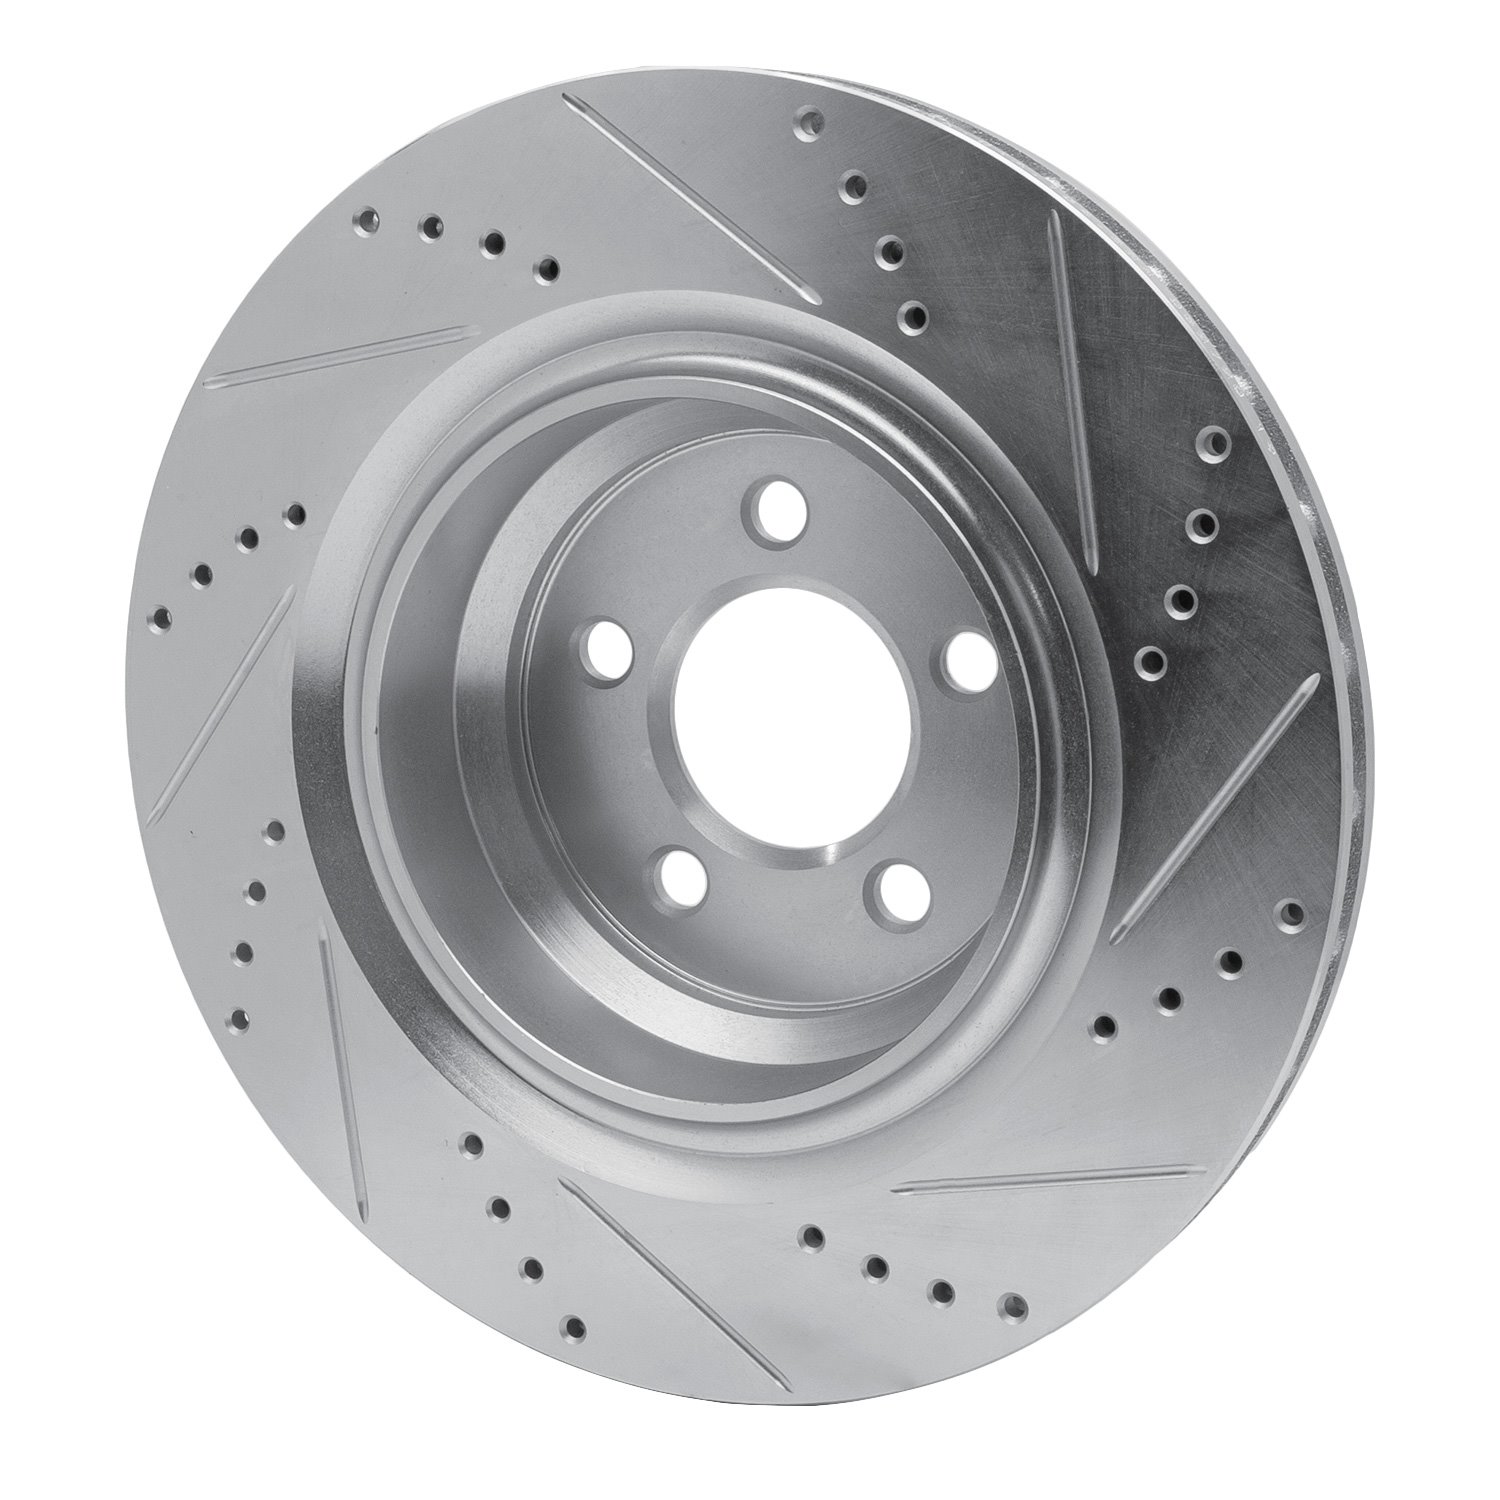 Drilled/Slotted Brake Rotor [Silver], Fits Select Mopar